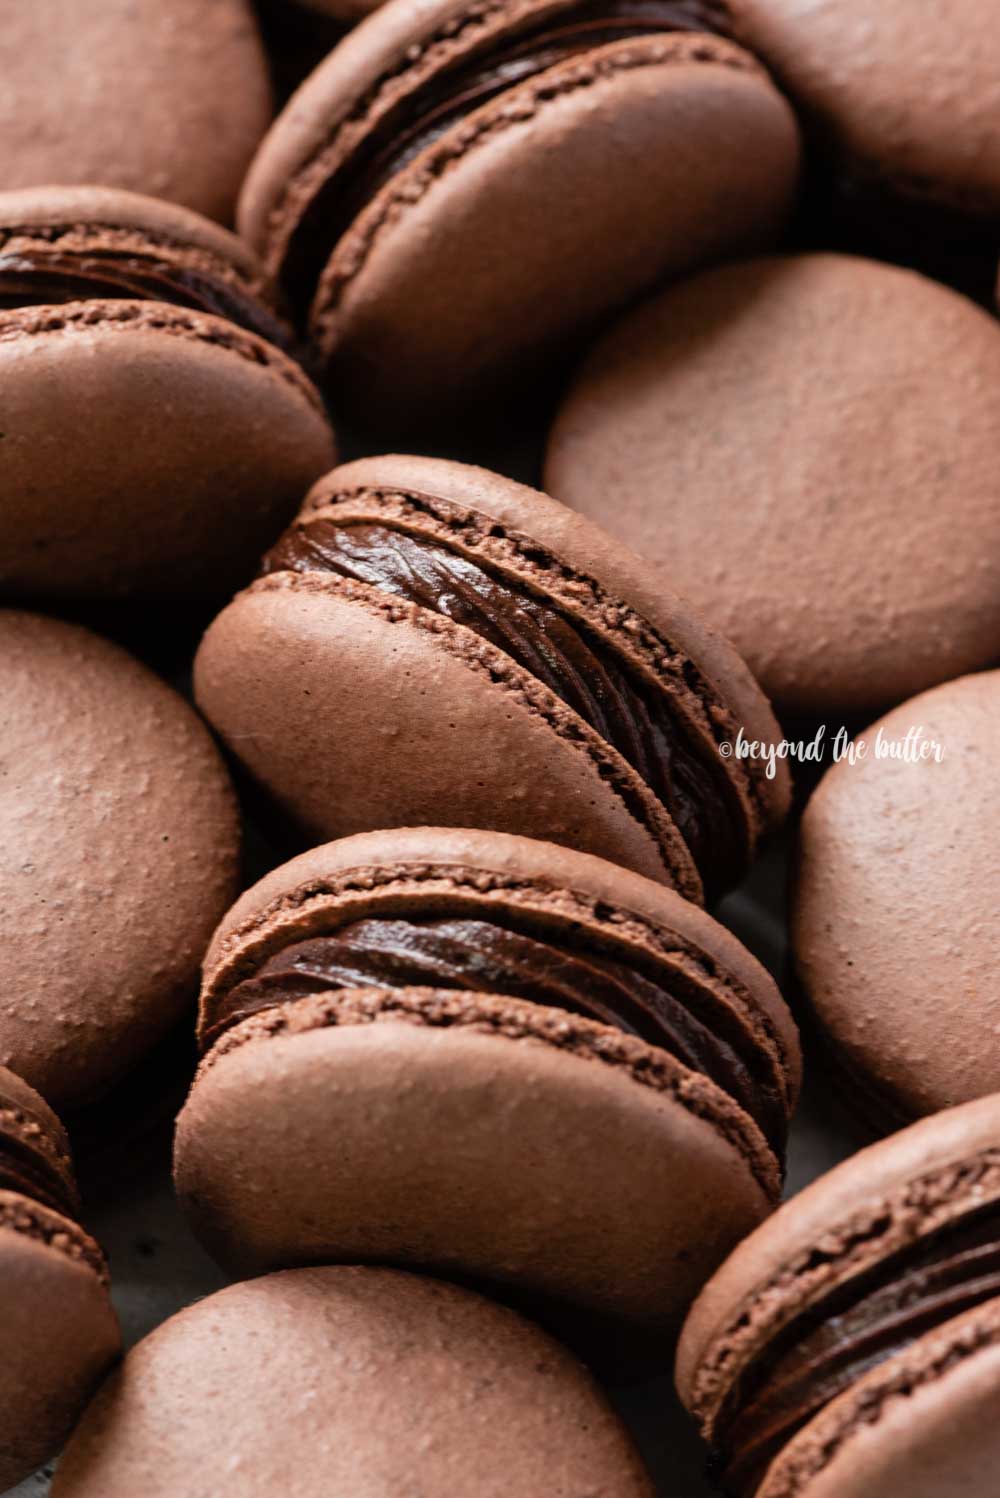 Angled image of randomly placed dark chocolate macarons | All Images © Beyond the Butter™